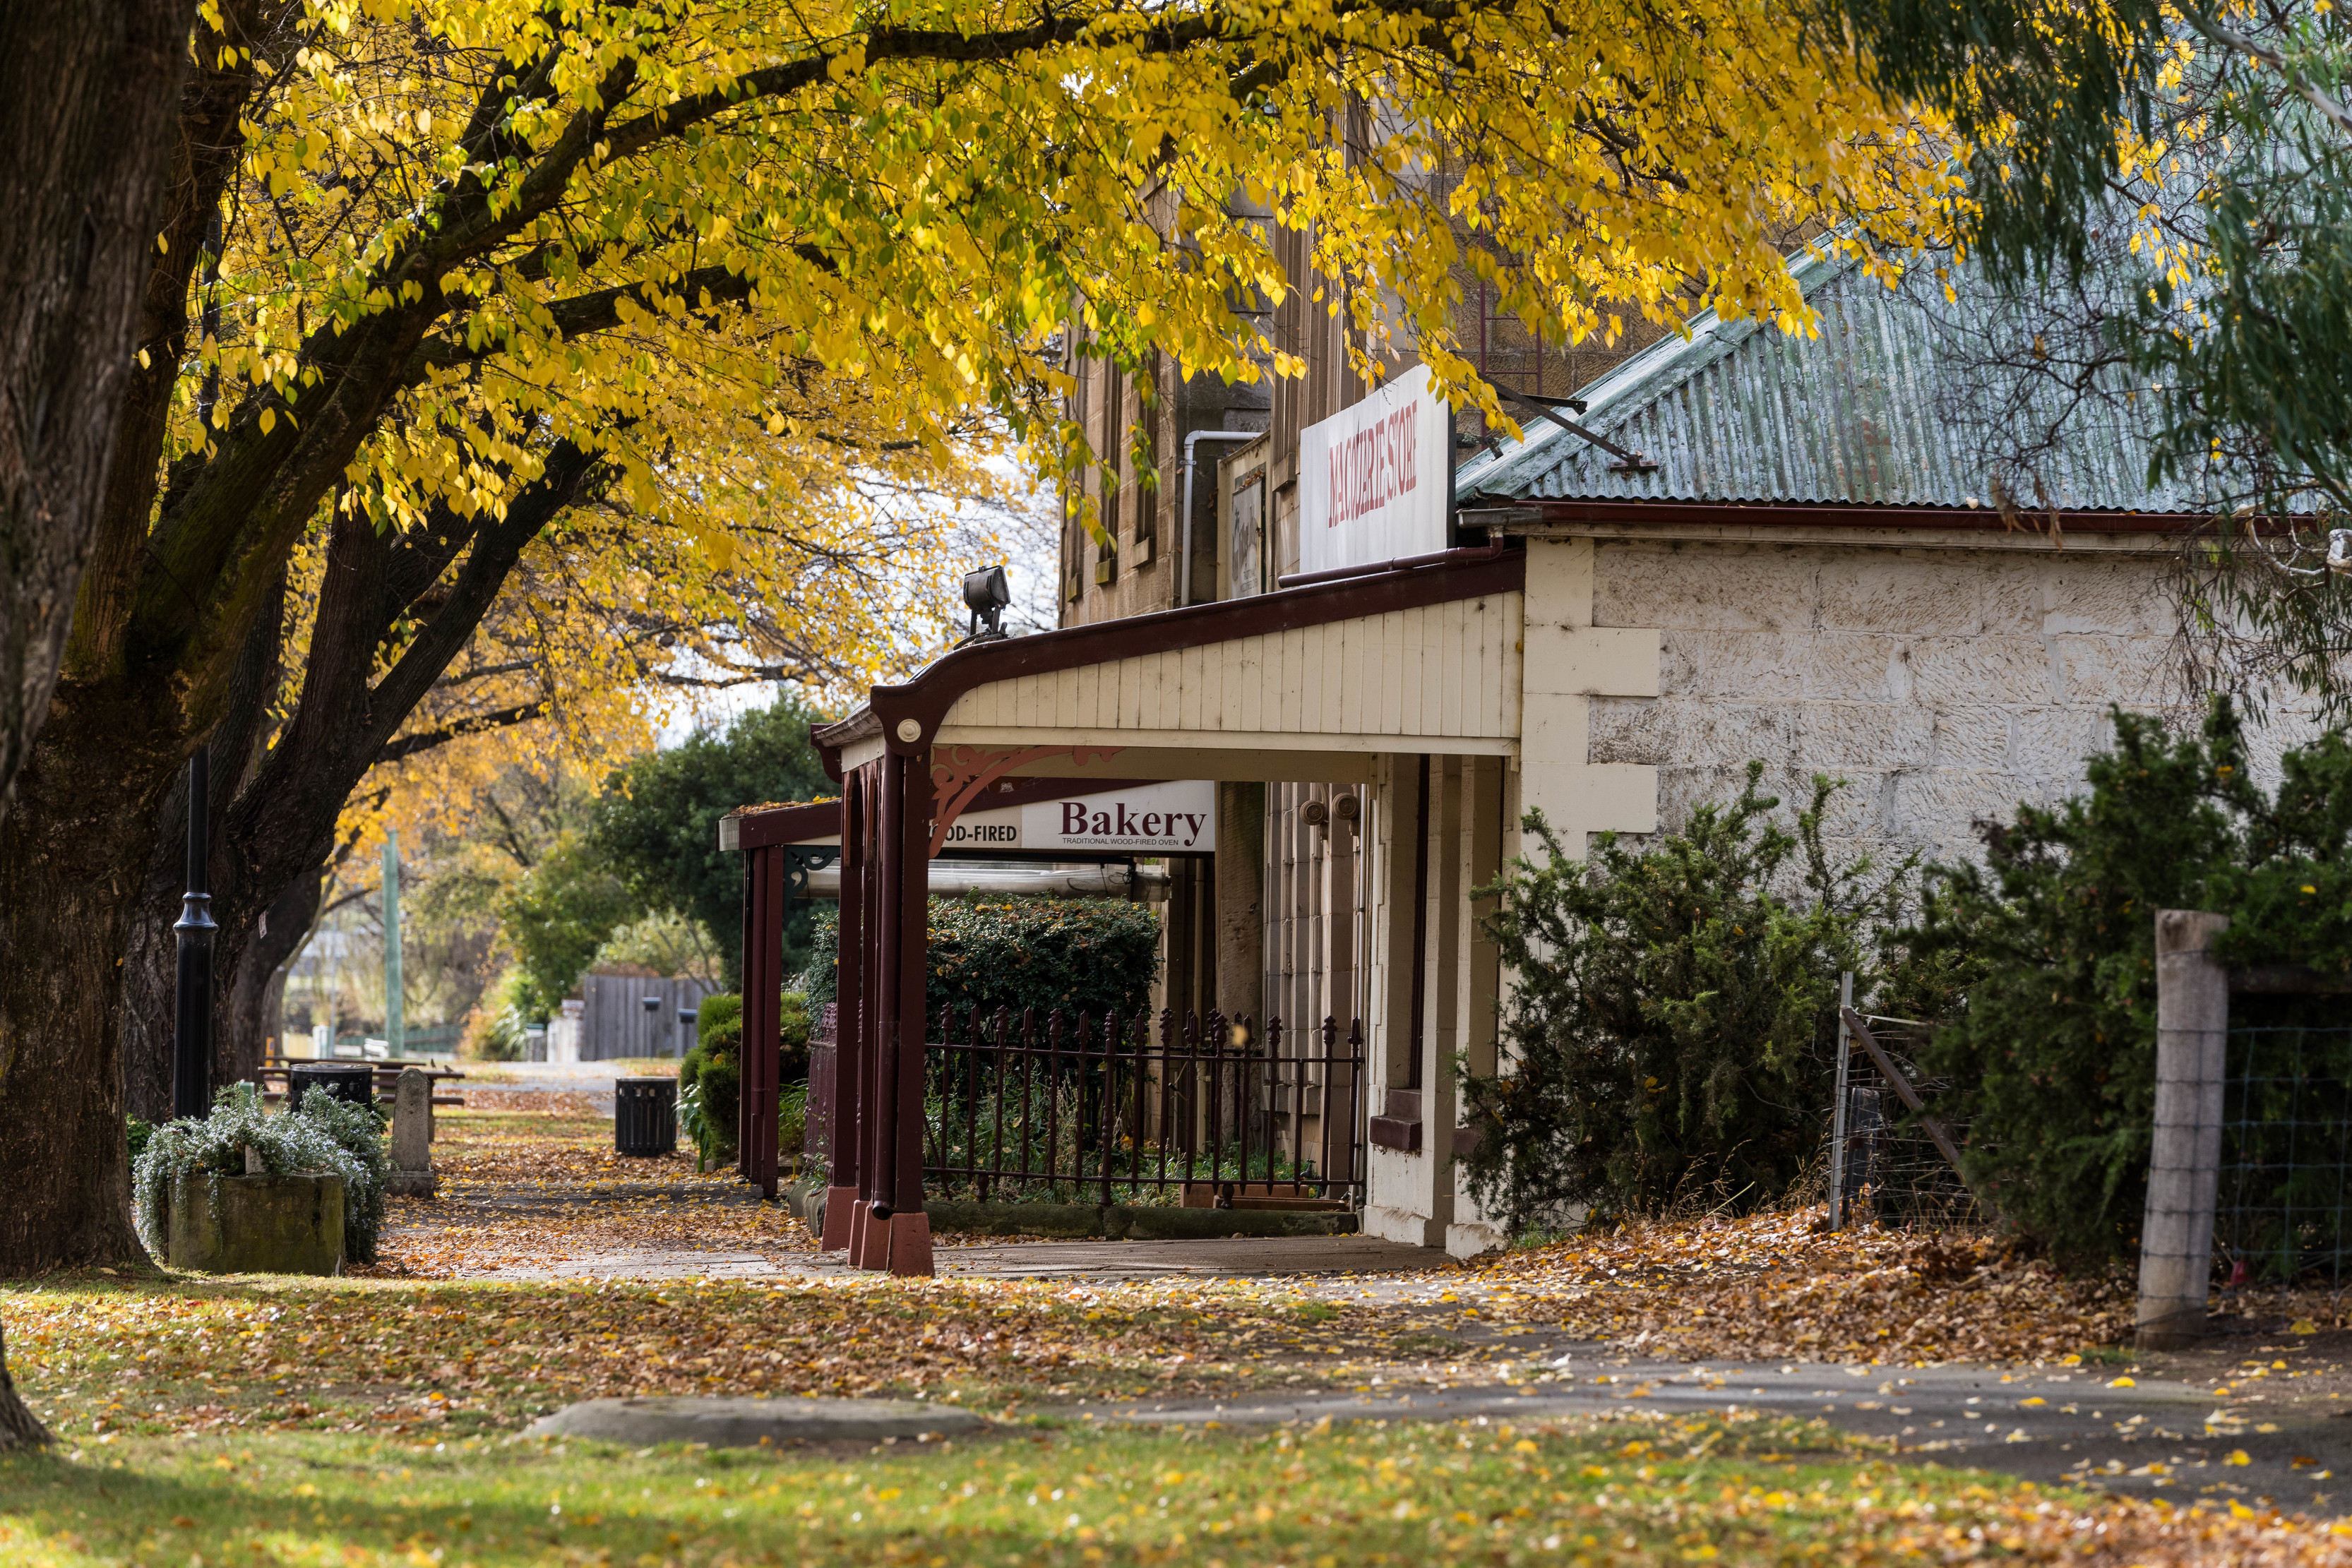 Exterior of Bakery31, home to the famous Tasmanian Scallop Pie, in Ross. Yellow autumn trees surround the building.